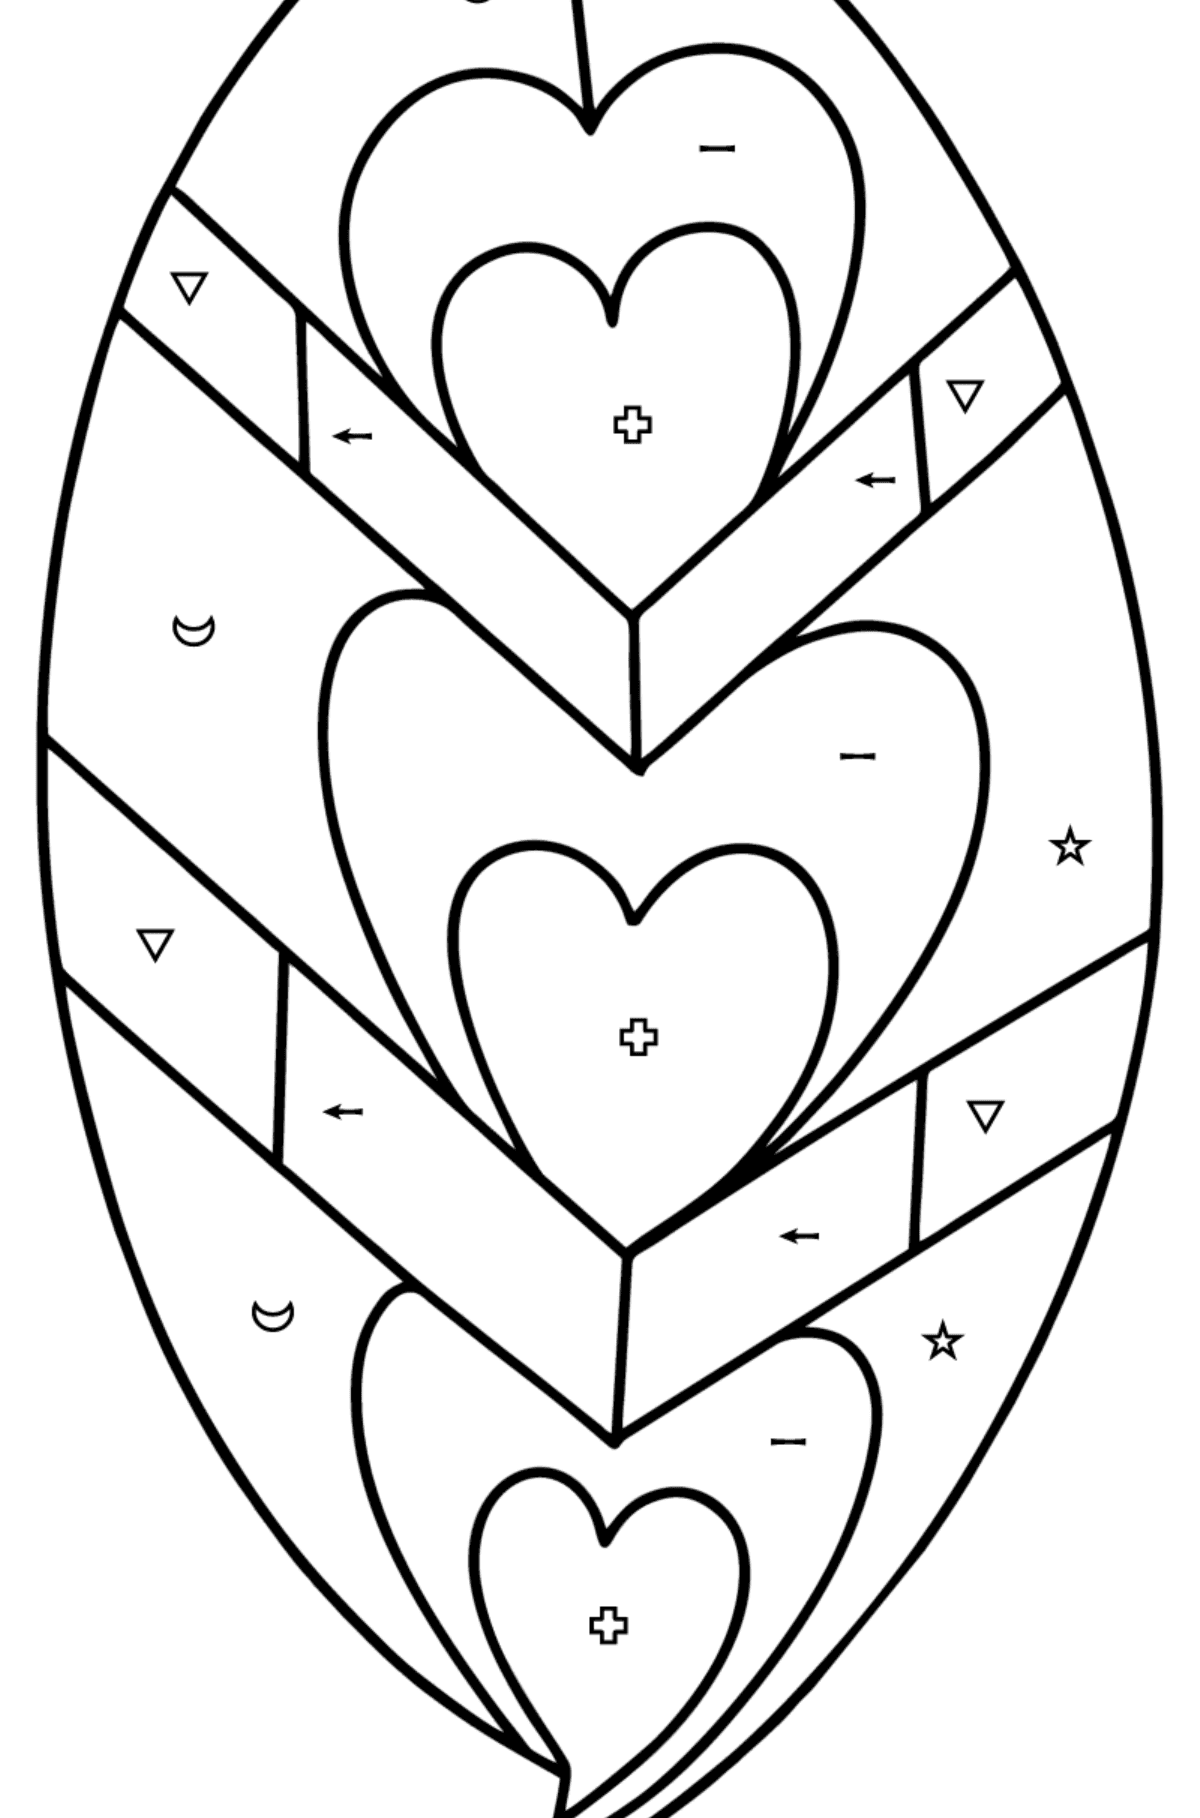 Zentangle Leaf coloring page - Coloring by Symbols and Geometric Shapes for Kids